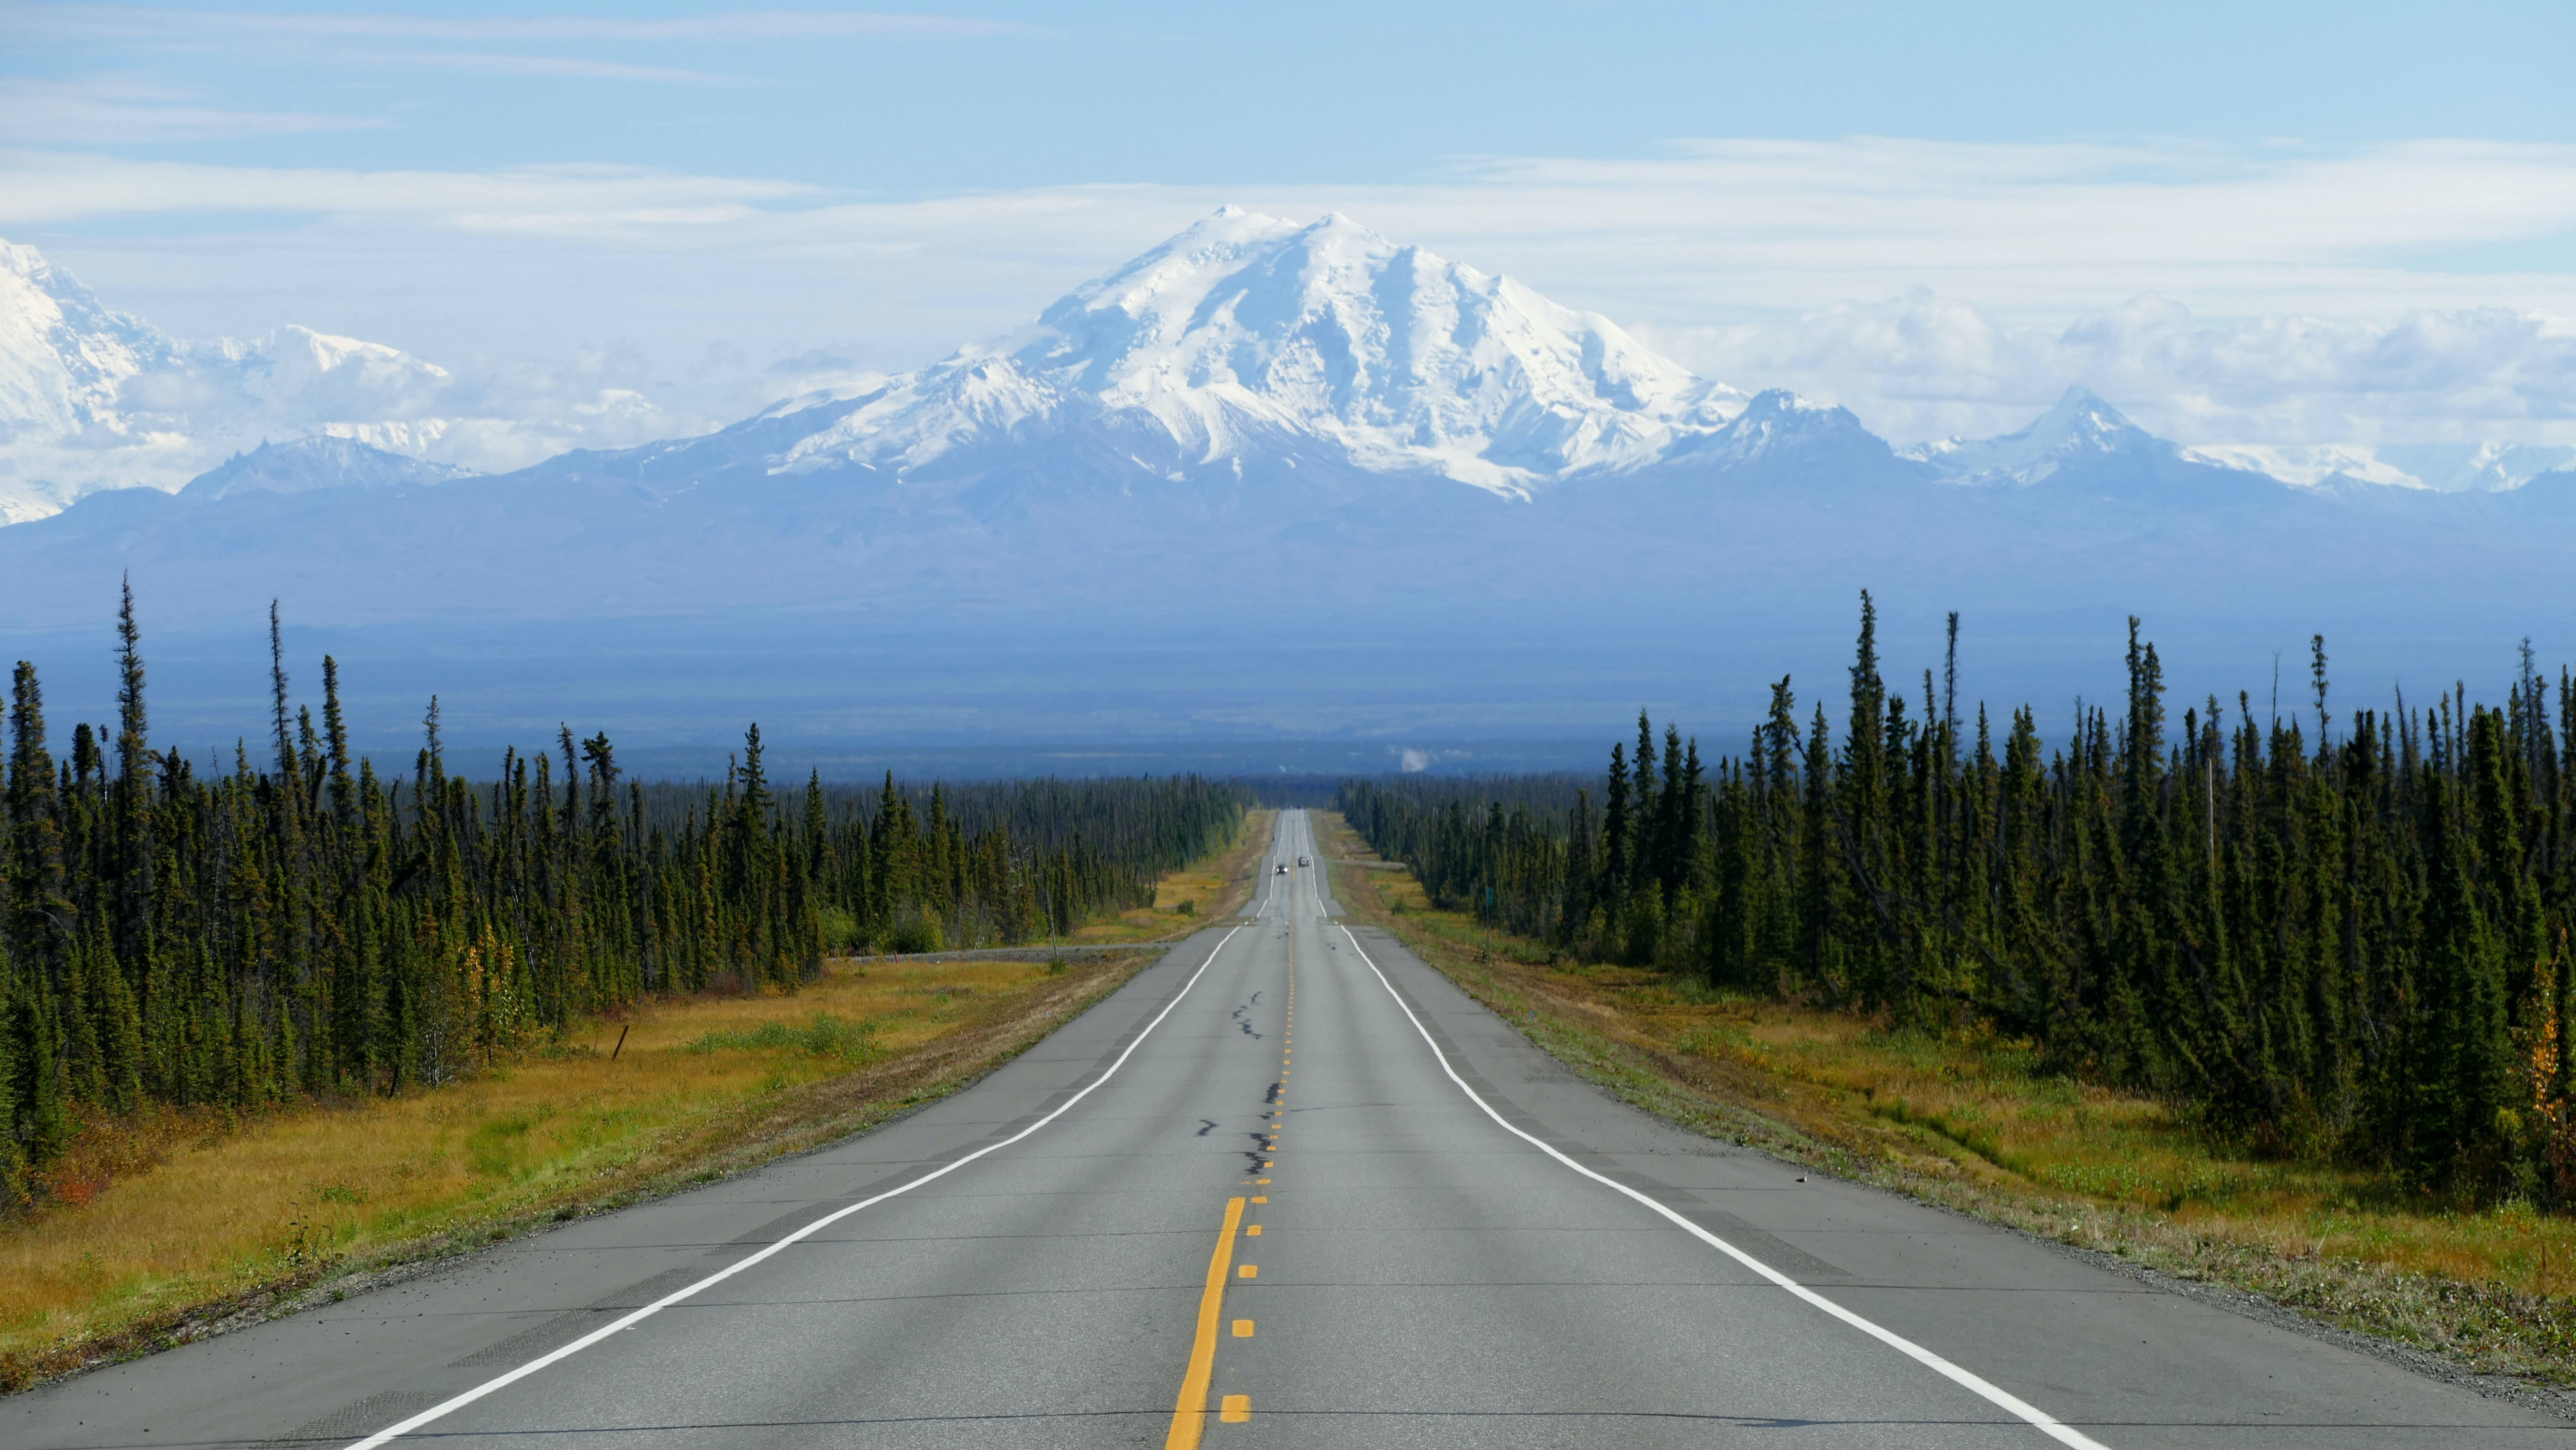 A long empty country road in Alaska. Want to ship a car to Alaska? Vehicle shipping nationwide is what we provide.